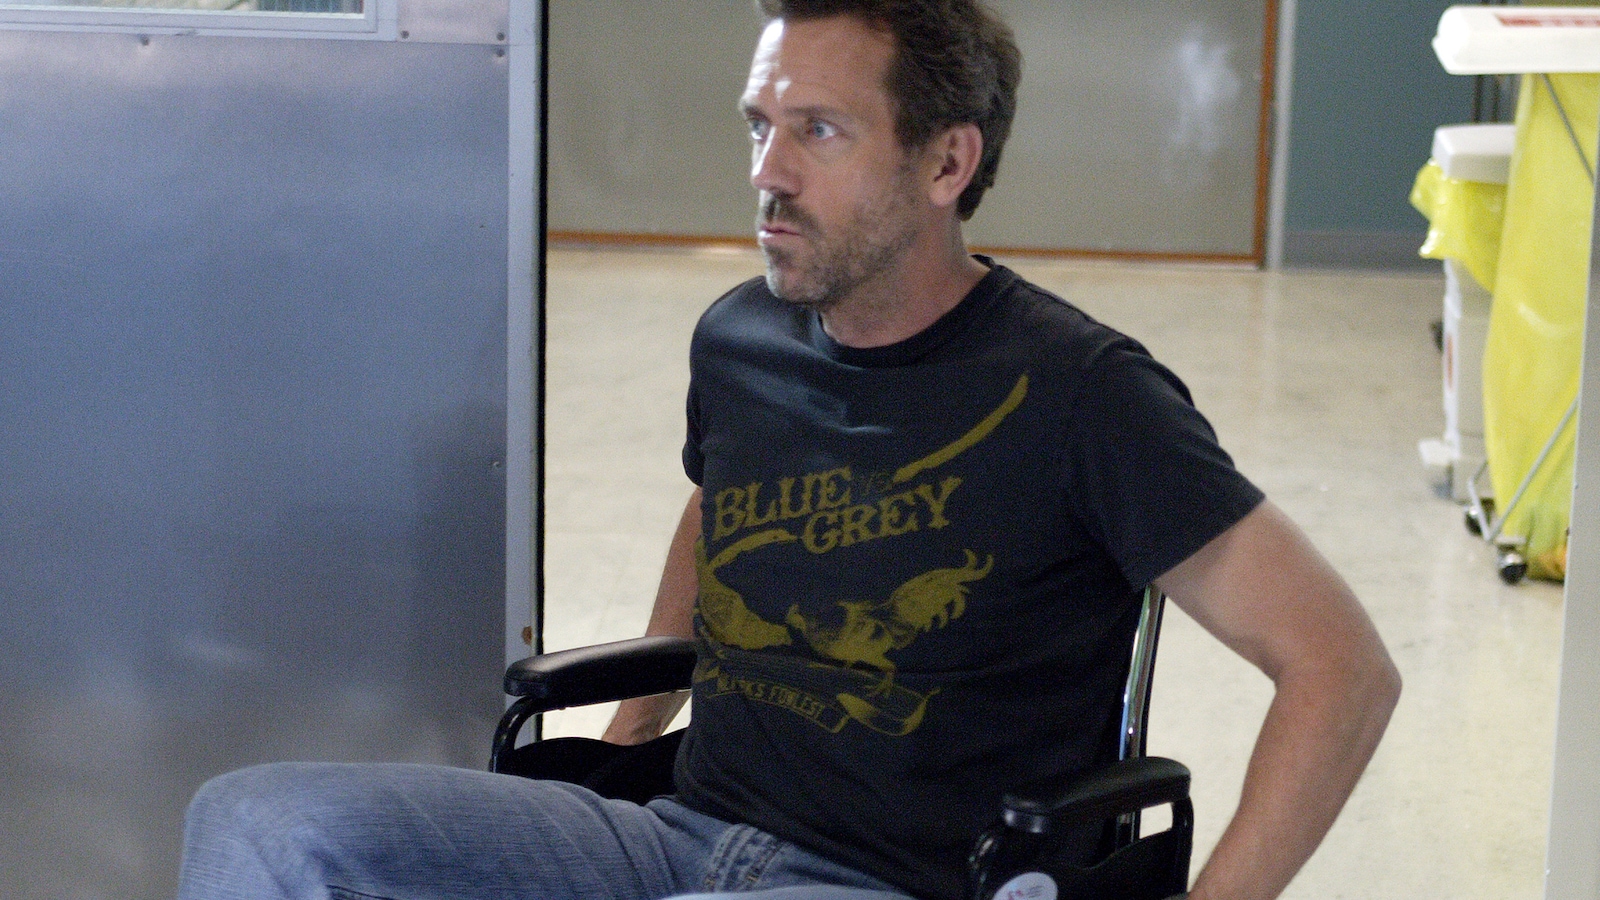 house/sesong-3/episode-13